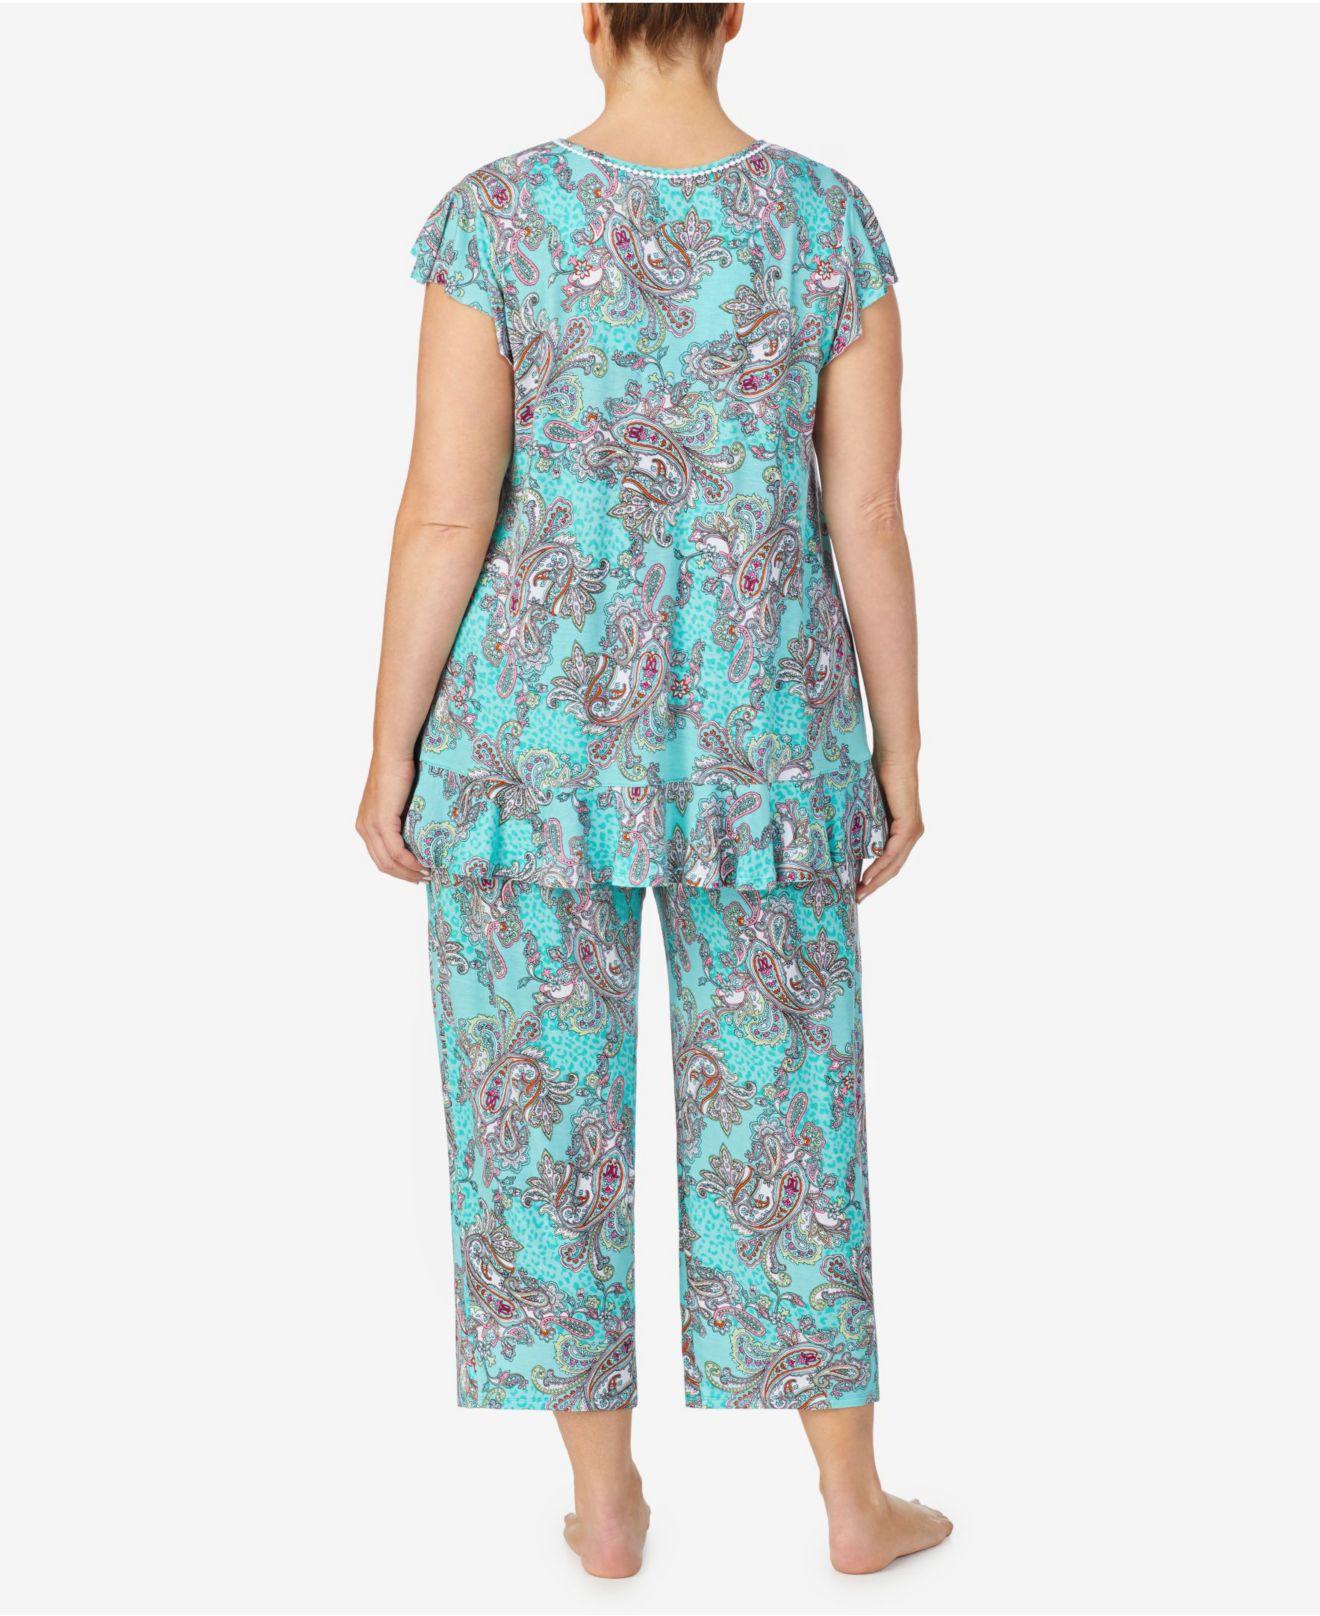 Ellen Tracy Synthetic Plus Size Short Sleeve Pajama Top in Turquoise ...